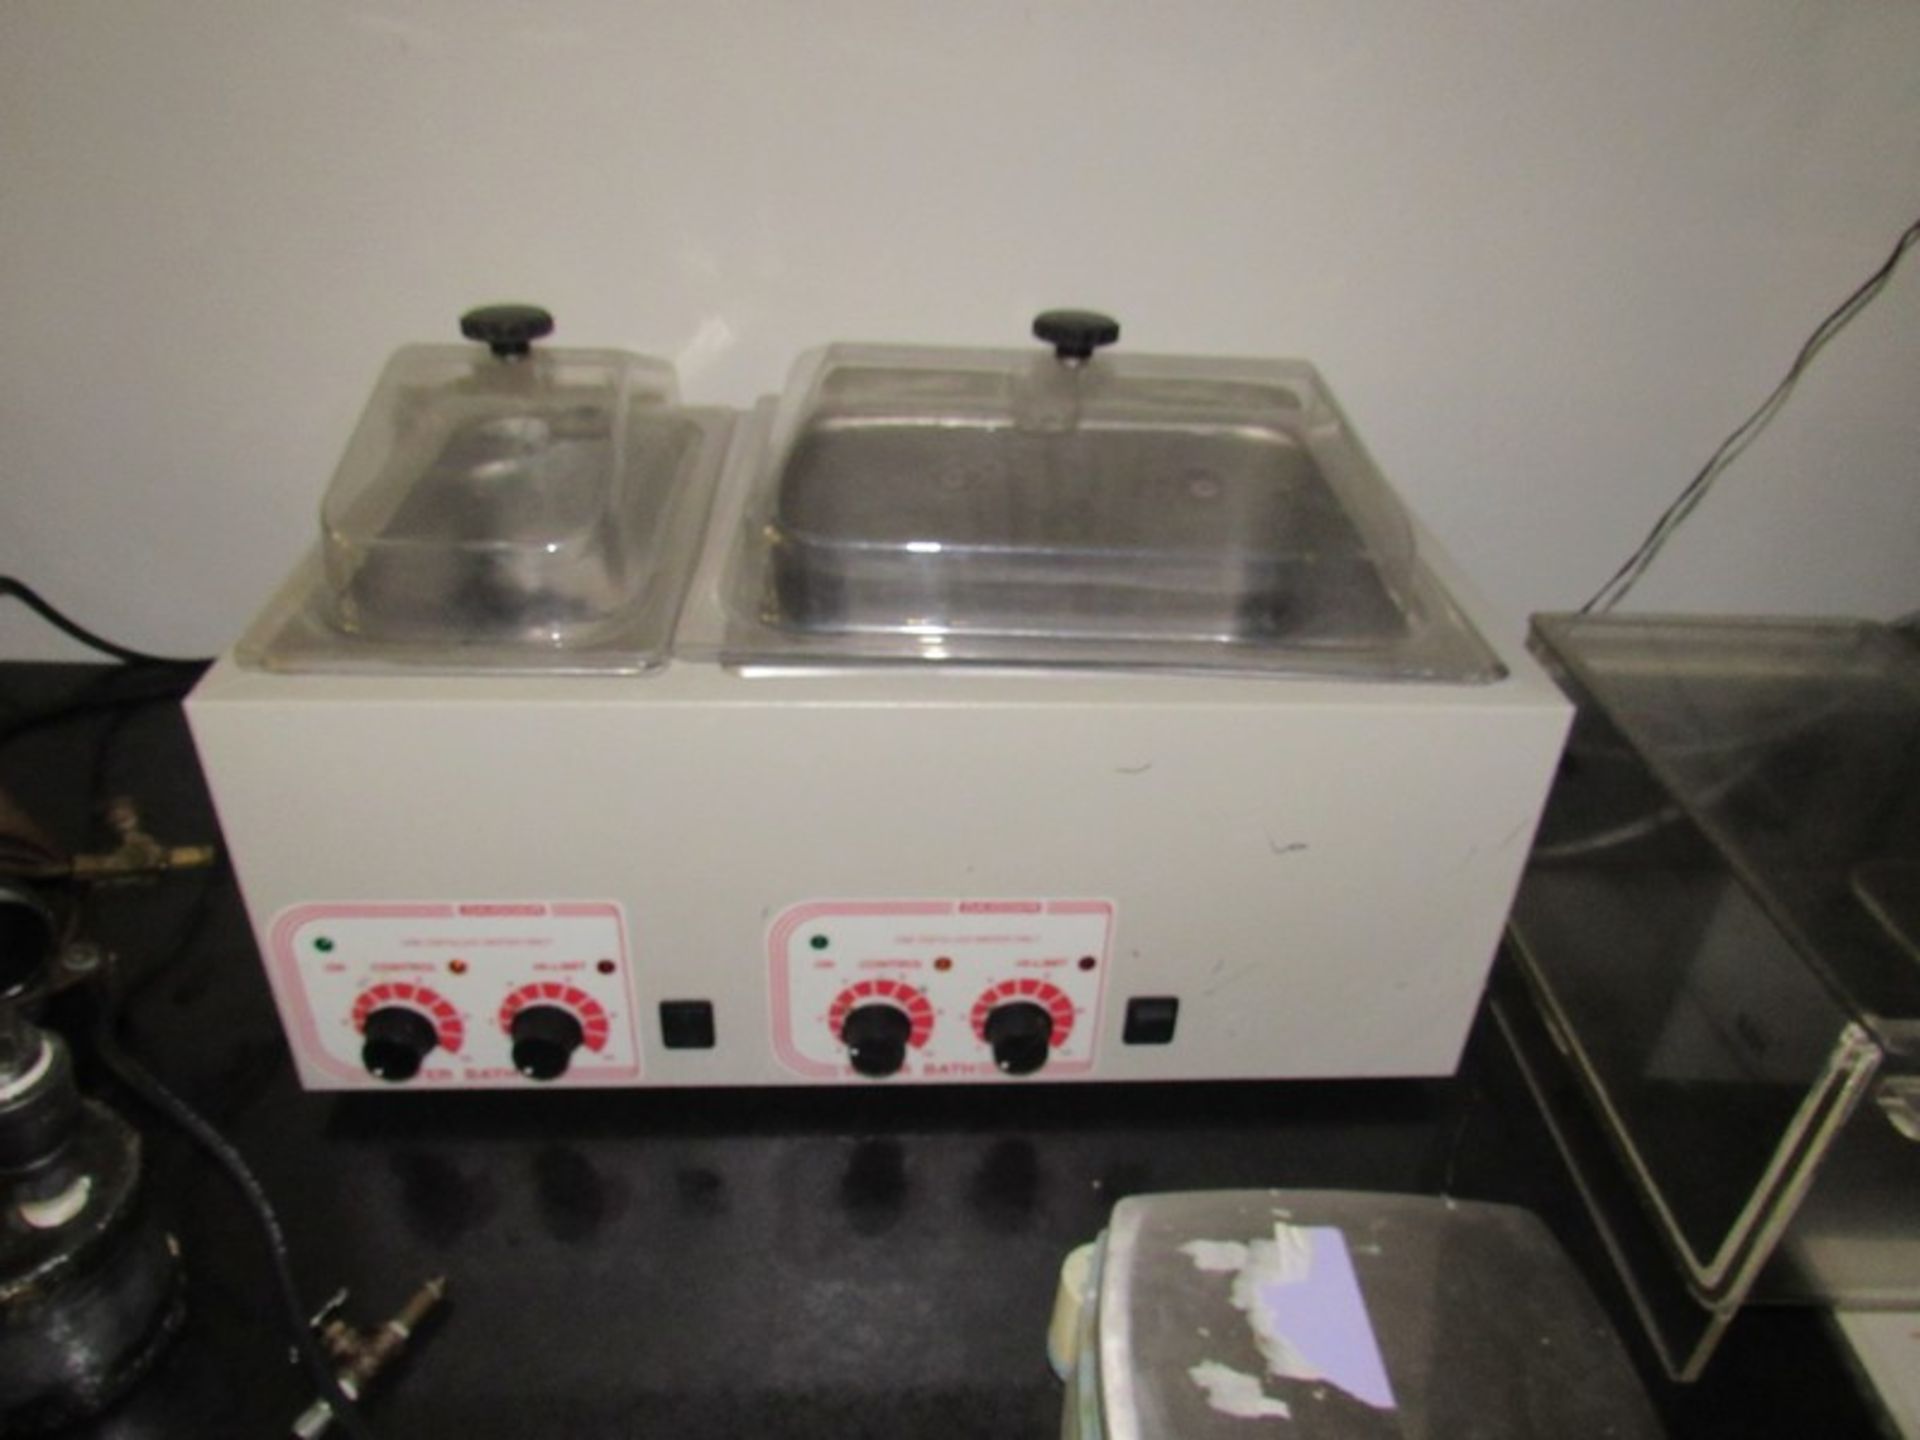 Diager Two Chamber Temperature Bath -- Free removal and loading - optional packaging for UPS